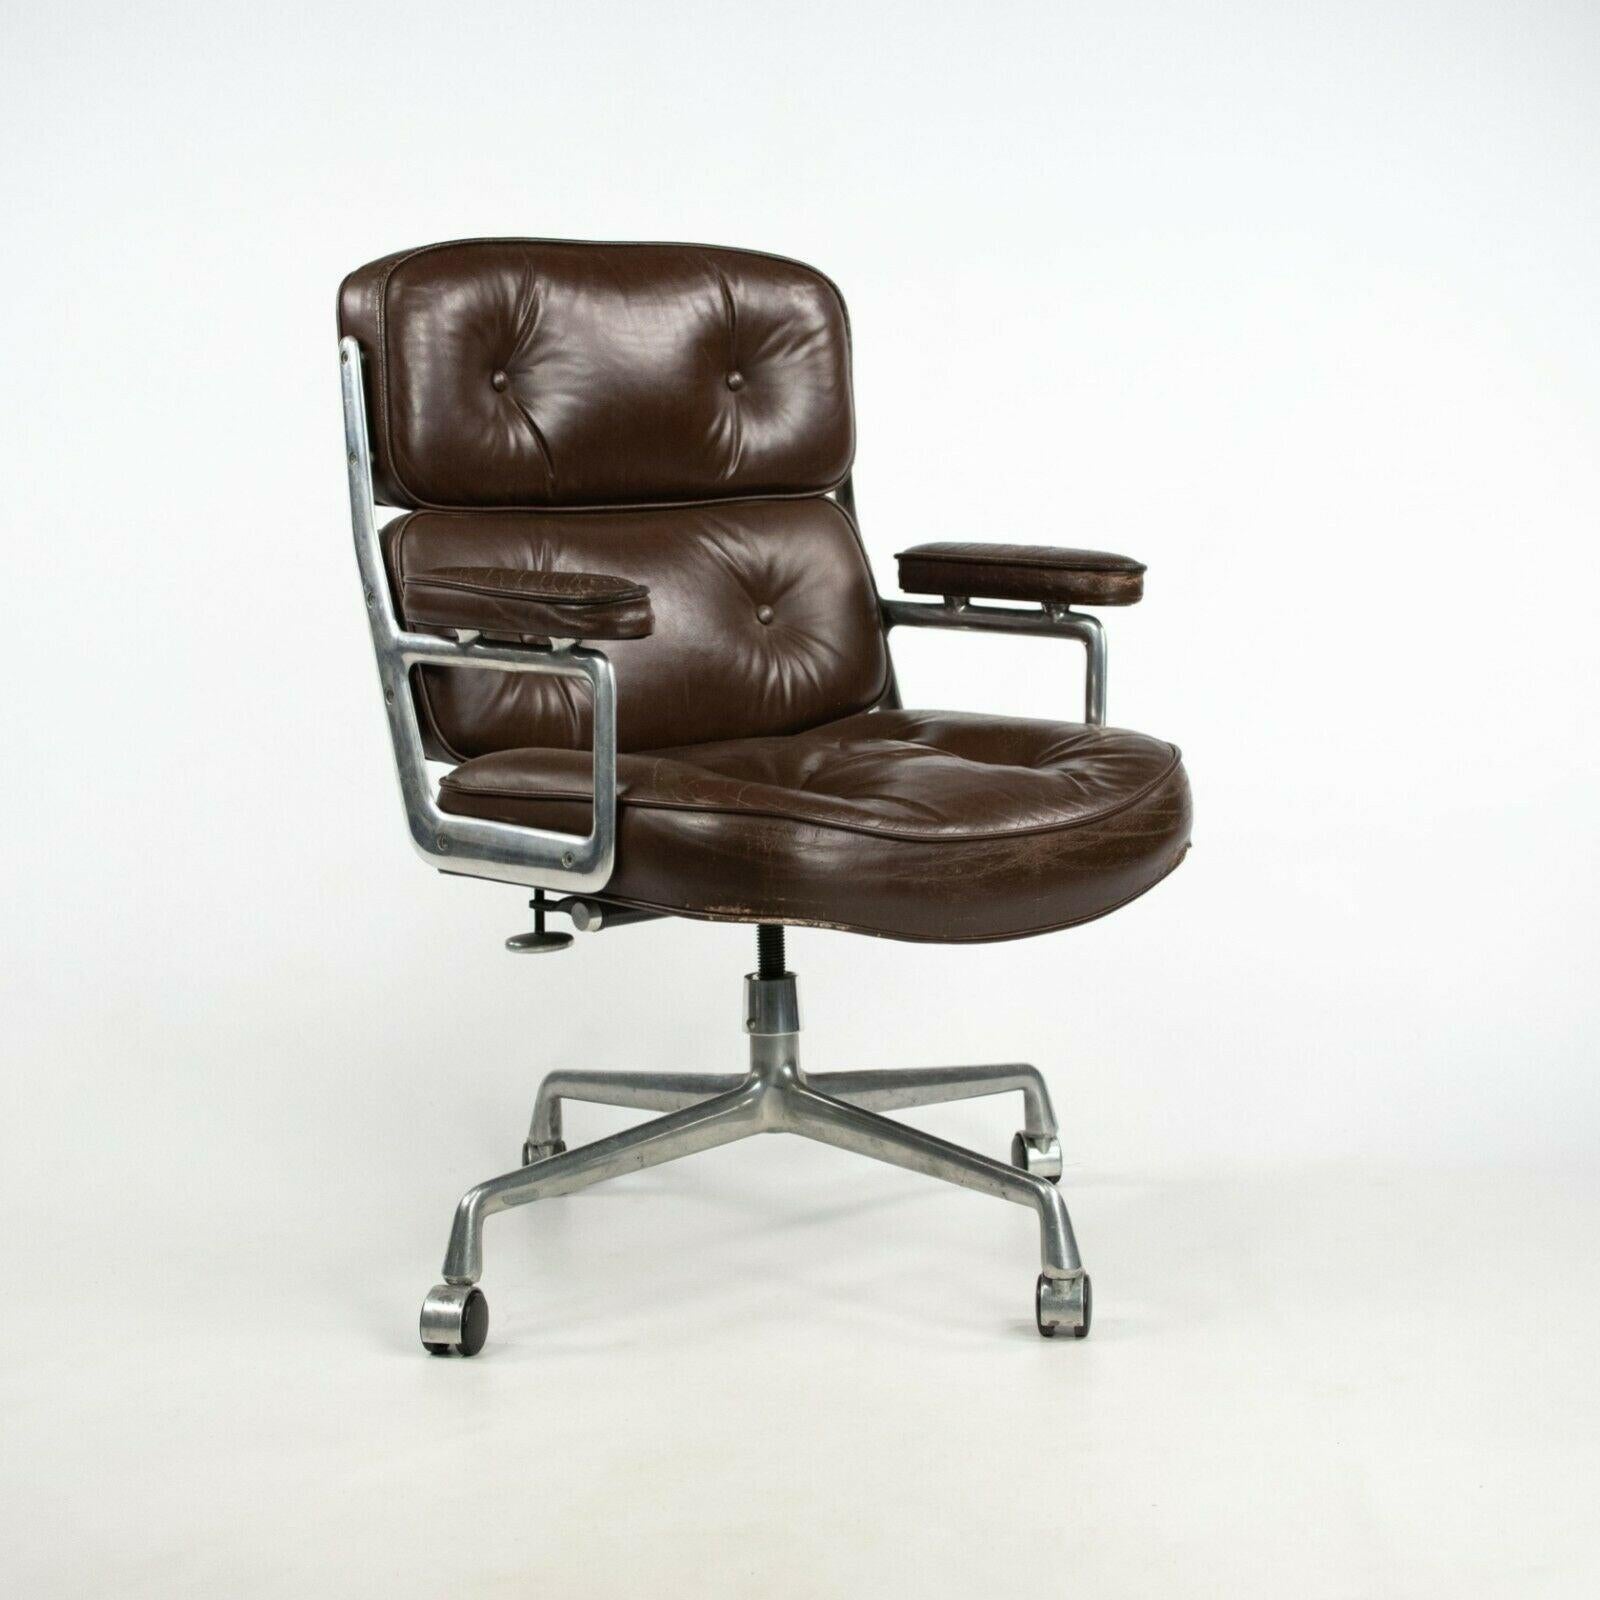 1989 Herman Miller Eames Time Life Executive Desk Chair in Brown Leather 1